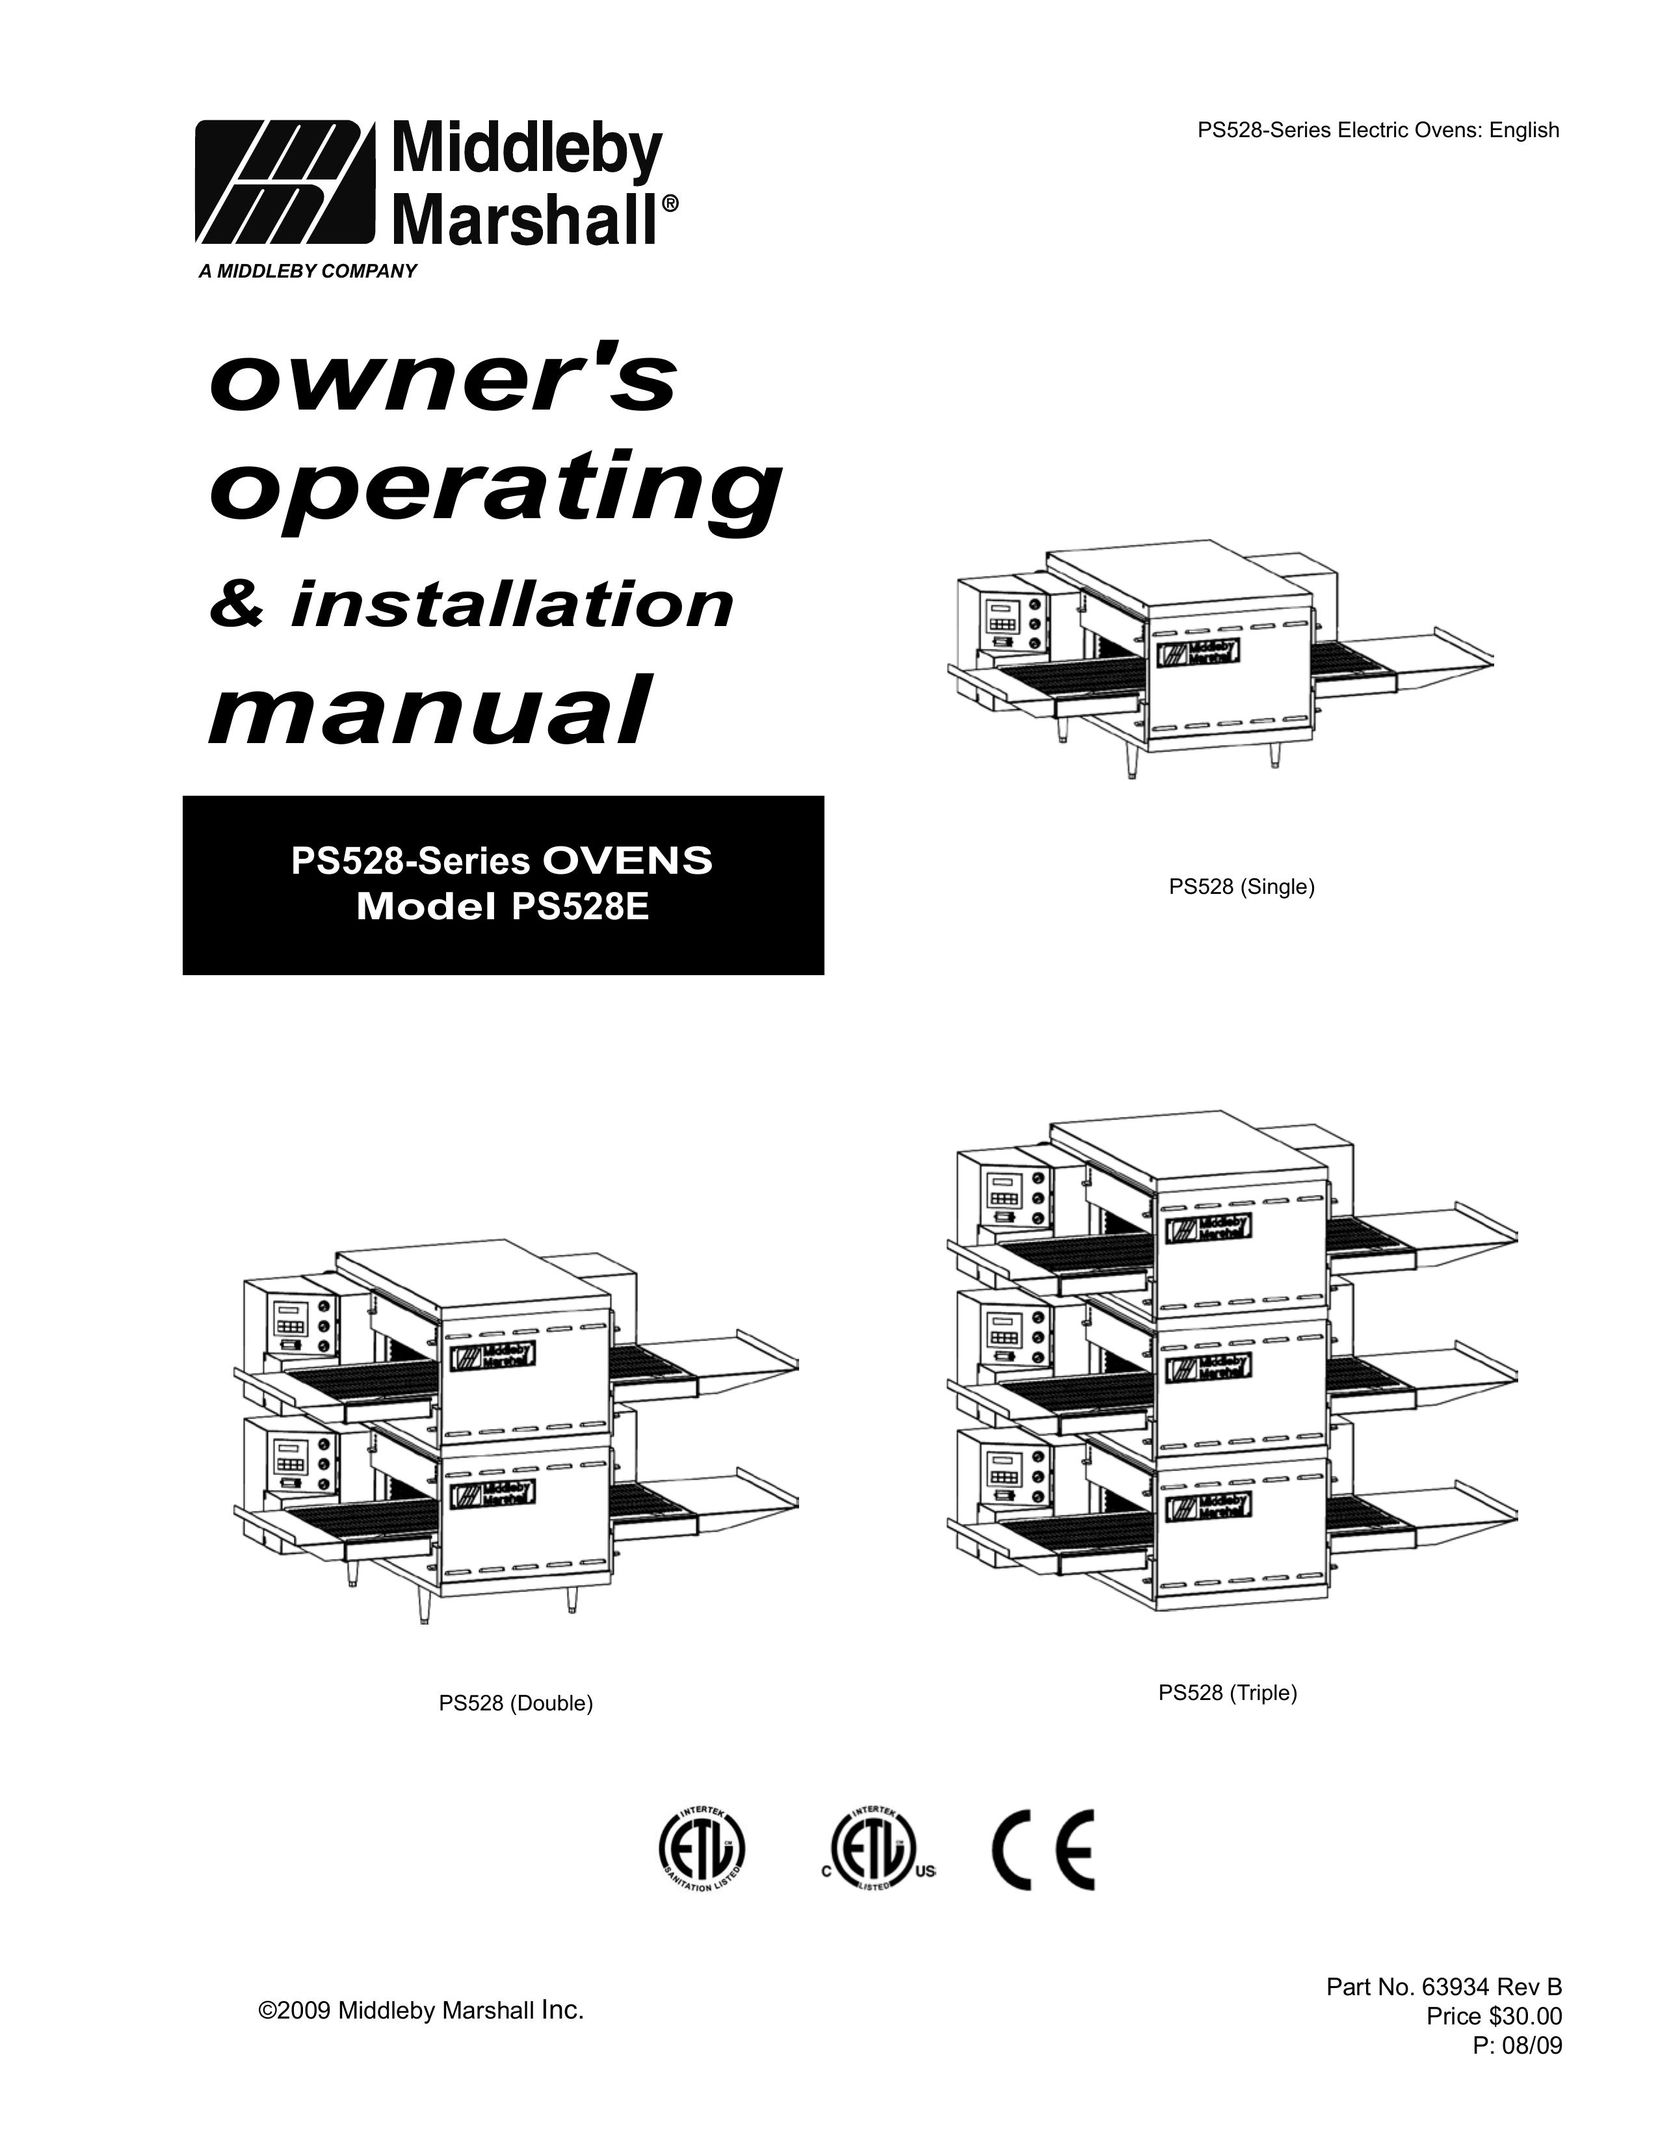 Middleby Marshall PS528 (Double) Oven User Manual